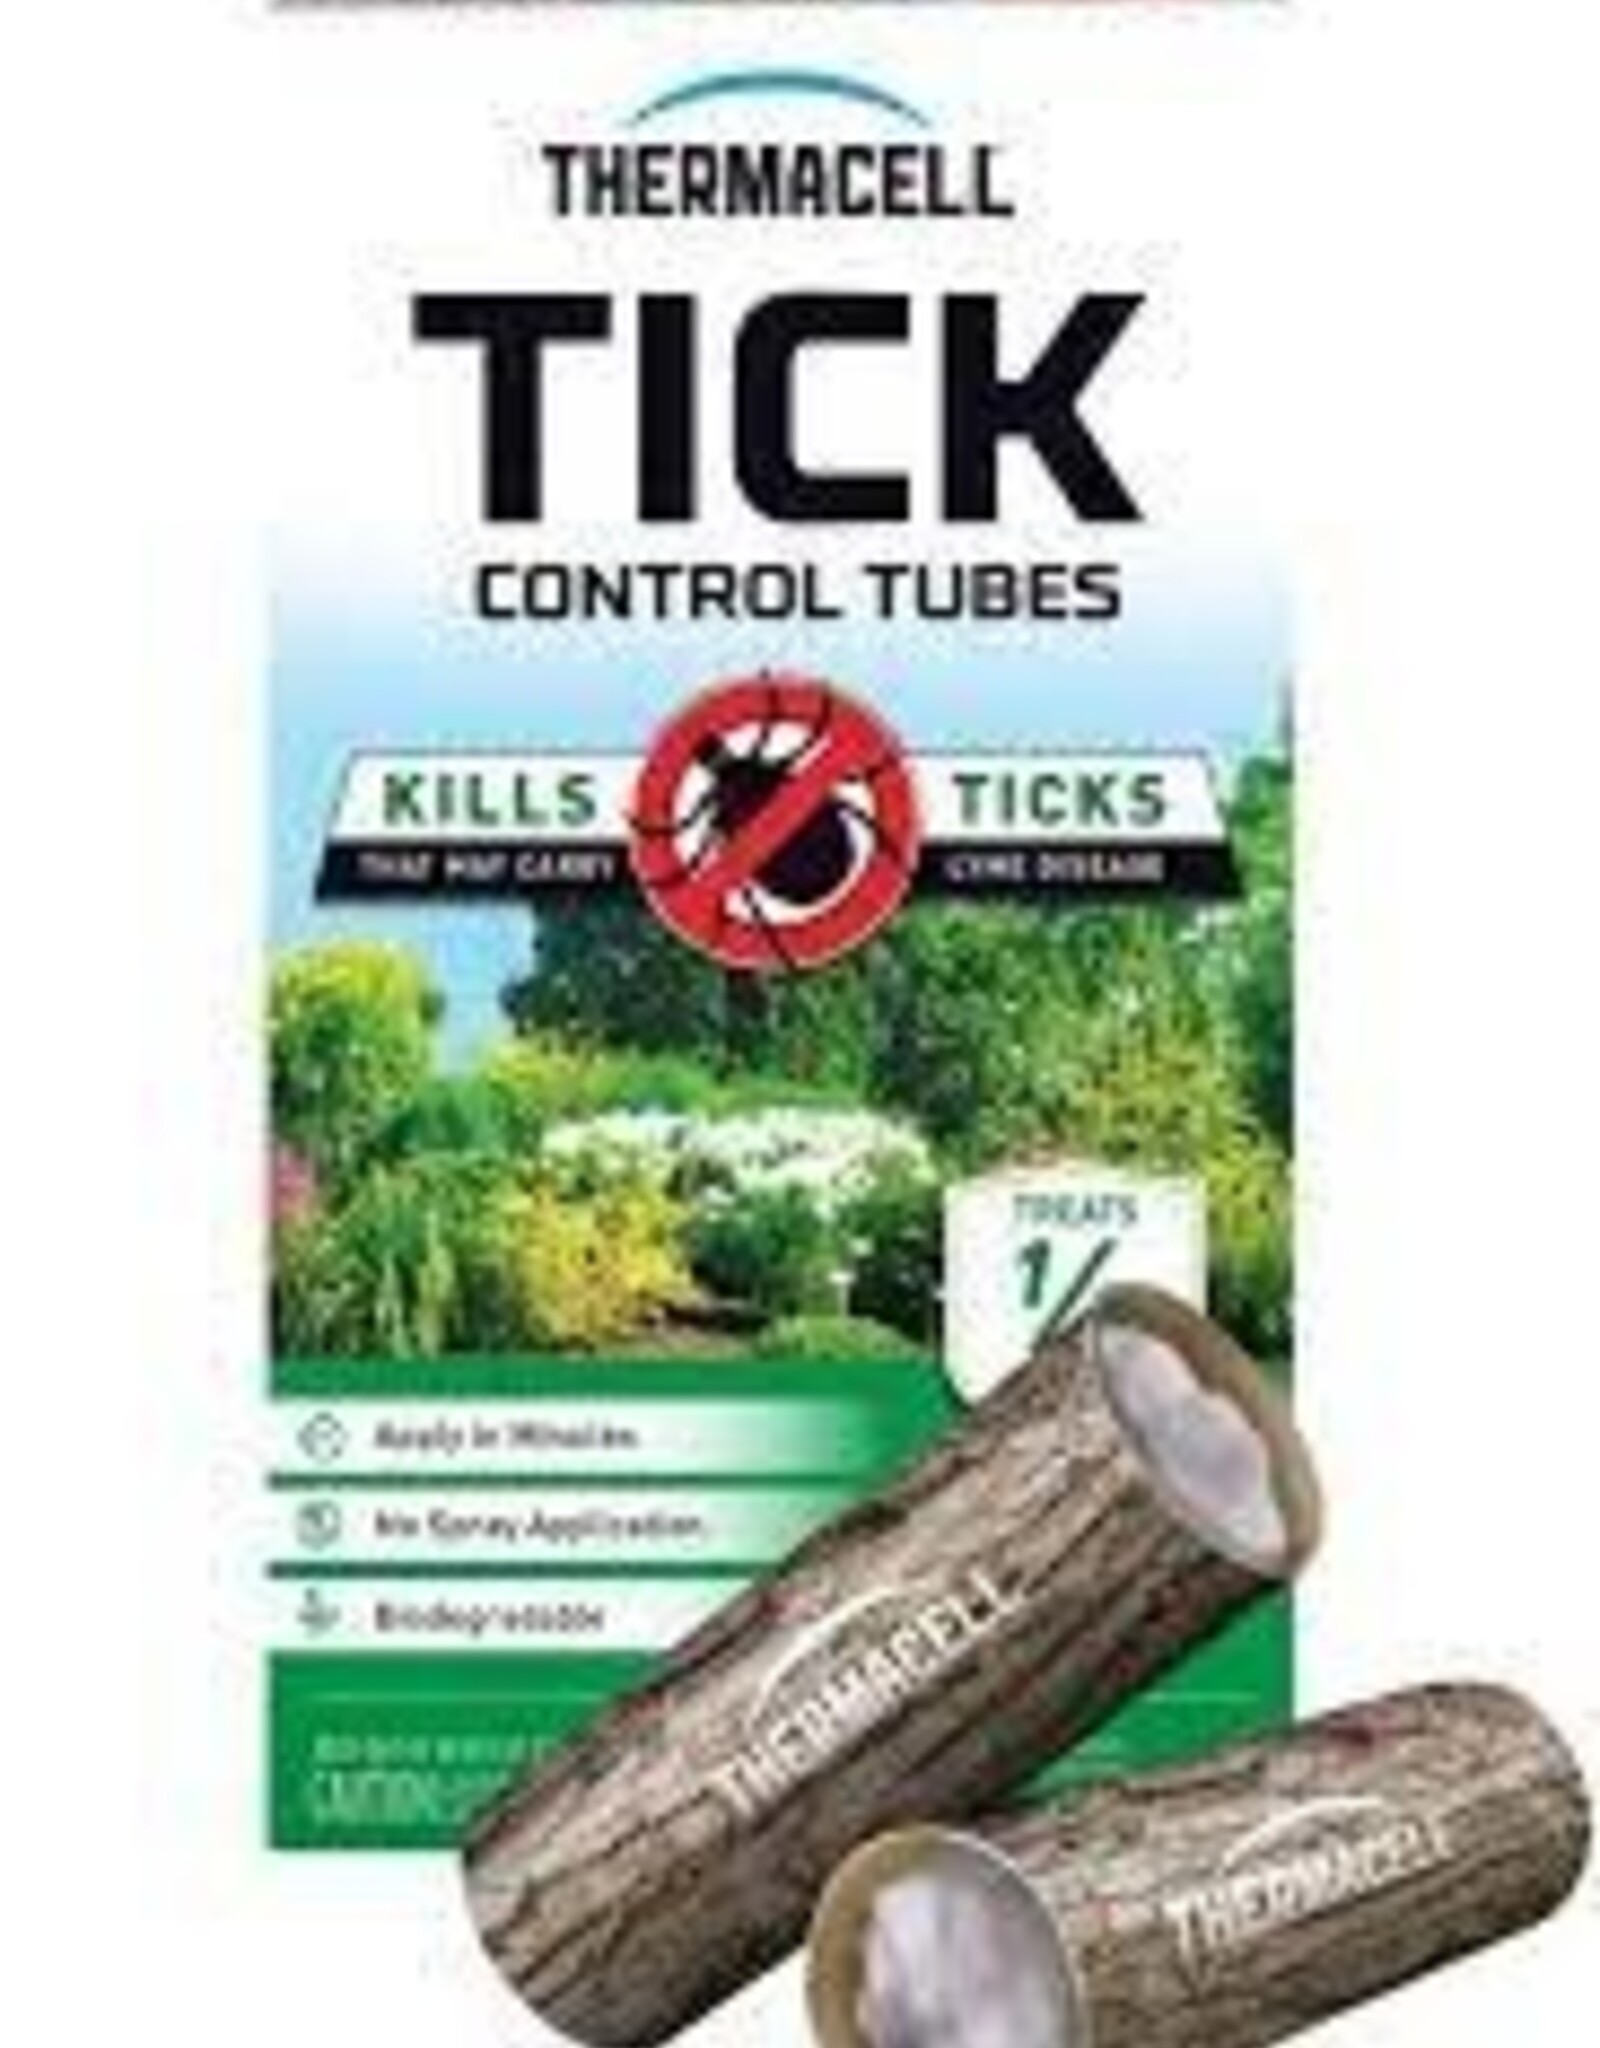 Thermacell Tick Control Tubes